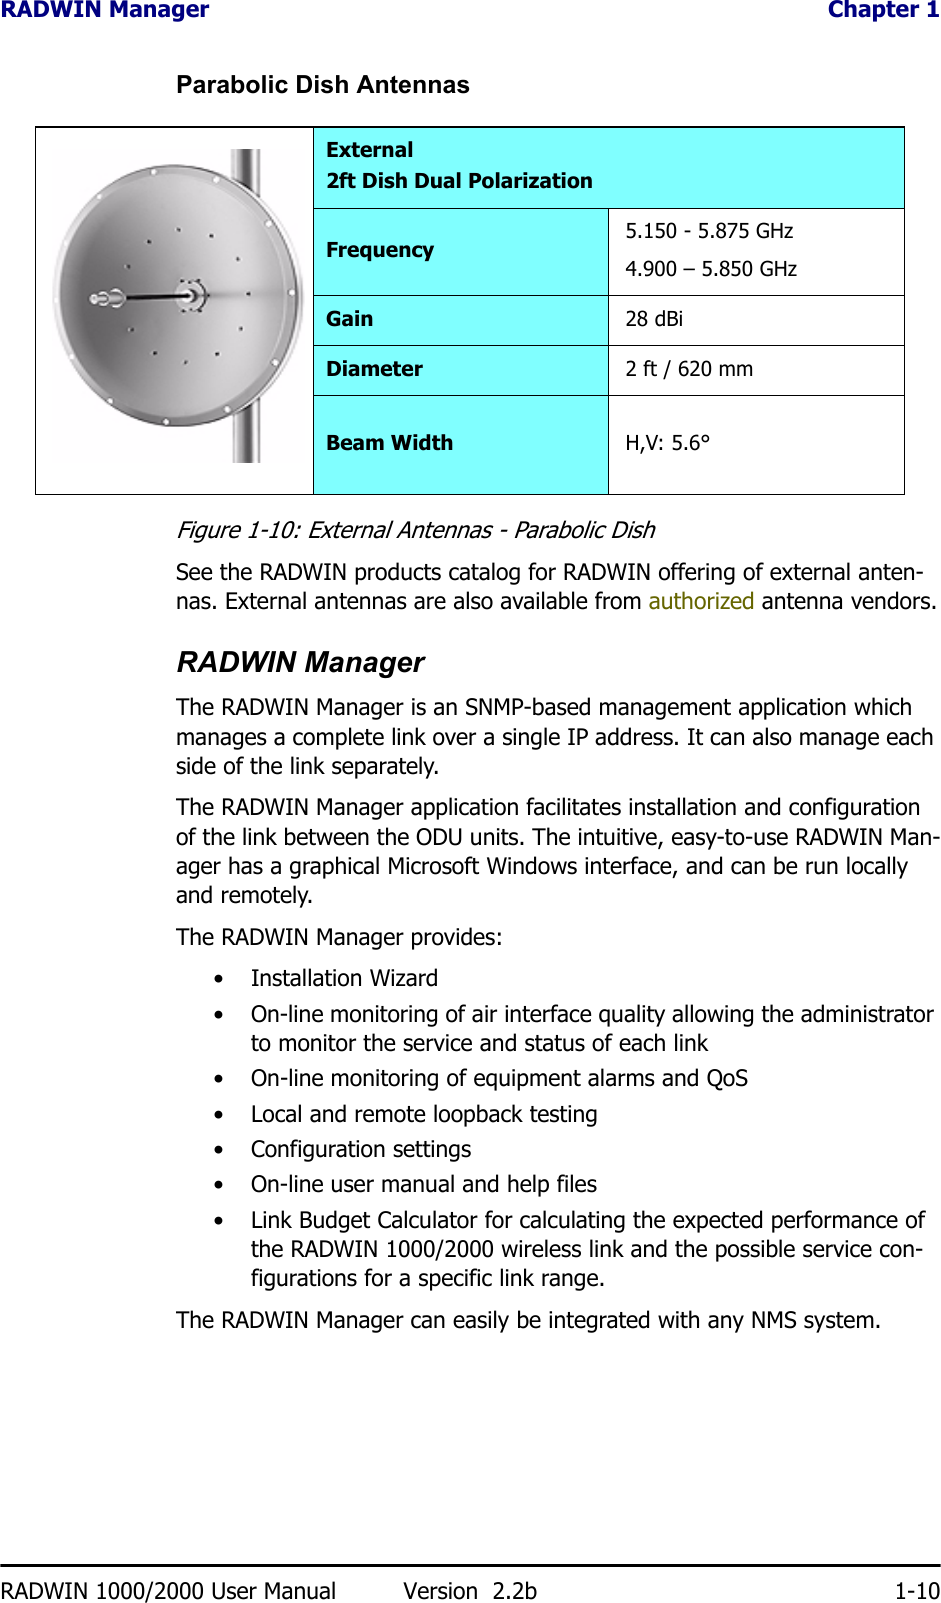 RADWIN Manager  Chapter 1RADWIN 1000/2000 User Manual Version  2.2b 1-10Parabolic Dish AntennasFigure 1-10: External Antennas - Parabolic DishSee the RADWIN products catalog for RADWIN offering of external anten-nas. External antennas are also available from authorized antenna vendors.RADWIN ManagerThe RADWIN Manager is an SNMP-based management application which manages a complete link over a single IP address. It can also manage each side of the link separately.The RADWIN Manager application facilitates installation and configuration of the link between the ODU units. The intuitive, easy-to-use RADWIN Man-ager has a graphical Microsoft Windows interface, and can be run locally and remotely. The RADWIN Manager provides:• Installation Wizard• On-line monitoring of air interface quality allowing the administrator to monitor the service and status of each link• On-line monitoring of equipment alarms and QoS• Local and remote loopback testing• Configuration settings• On-line user manual and help files• Link Budget Calculator for calculating the expected performance of the RADWIN 1000/2000 wireless link and the possible service con-figurations for a specific link range.The RADWIN Manager can easily be integrated with any NMS system.External2ft Dish Dual PolarizationFrequency 5.150 - 5.875 GHz4.900 – 5.850 GHzGain 28 dBiDiameter 2 ft / 620 mmBeam Width H,V: 5.6°